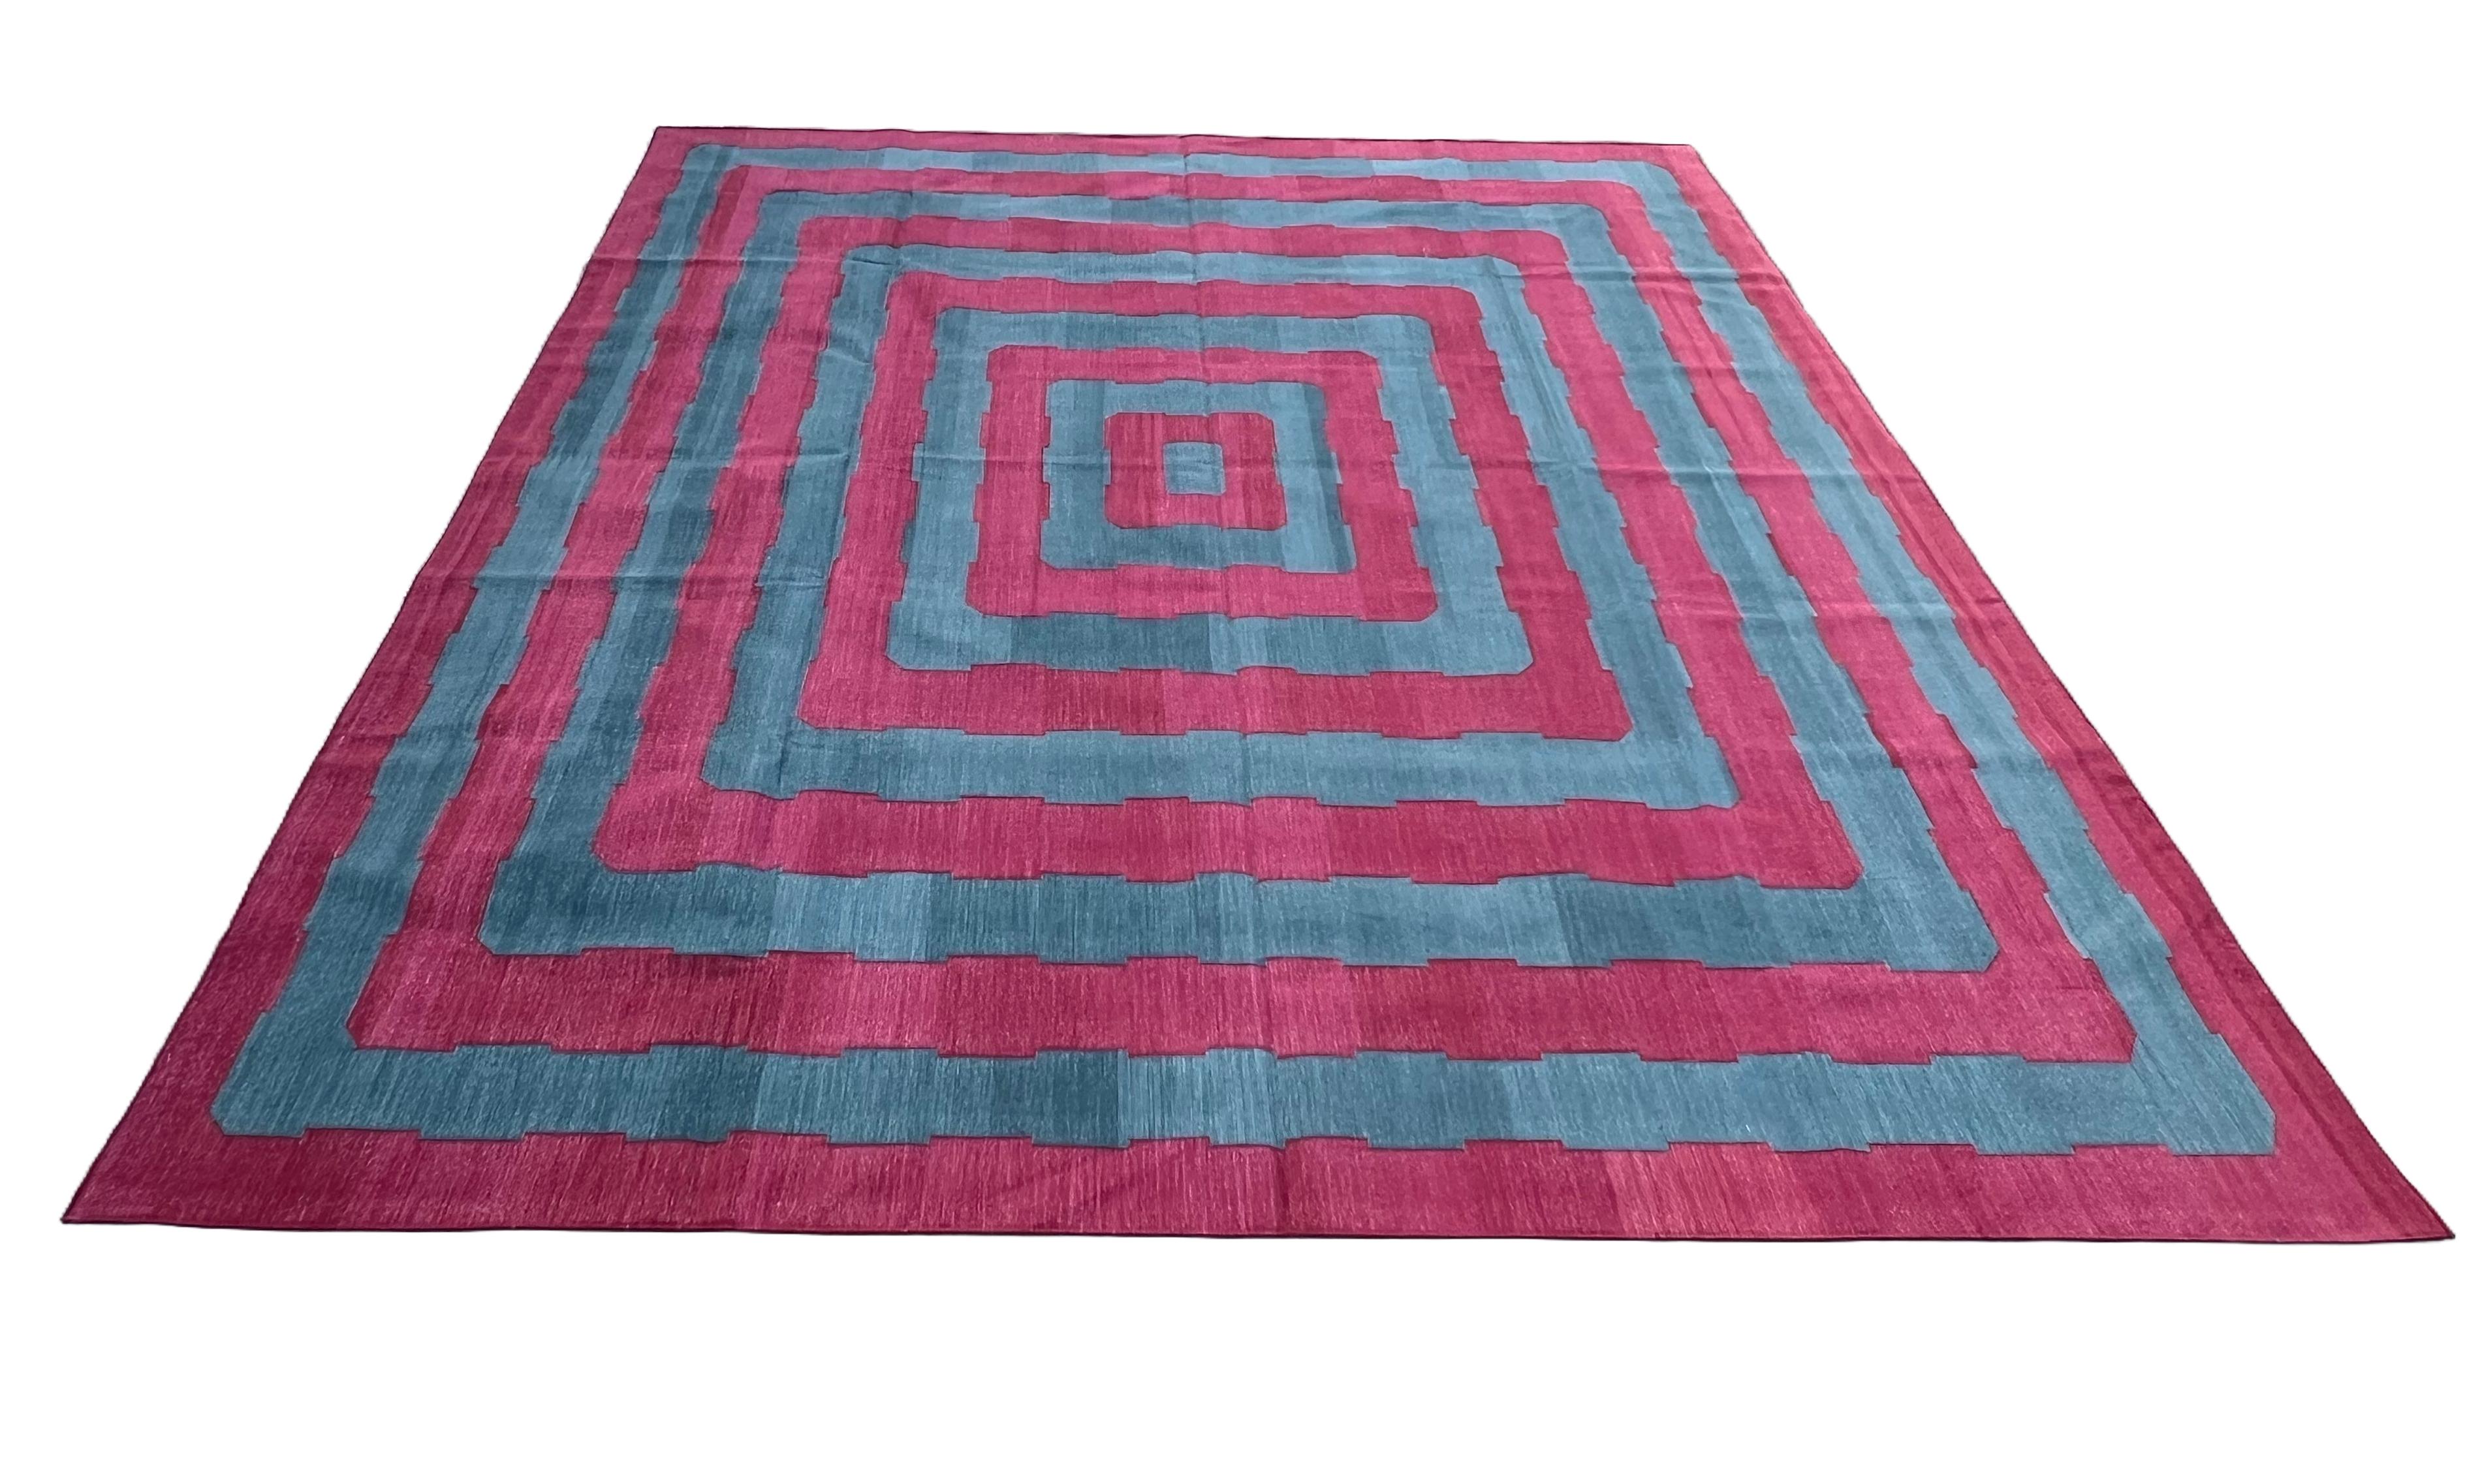 Handmade Cotton Area Flat Weave Rug, 10x14 Blue And Pink Striped Indian Dhurrie For Sale 1